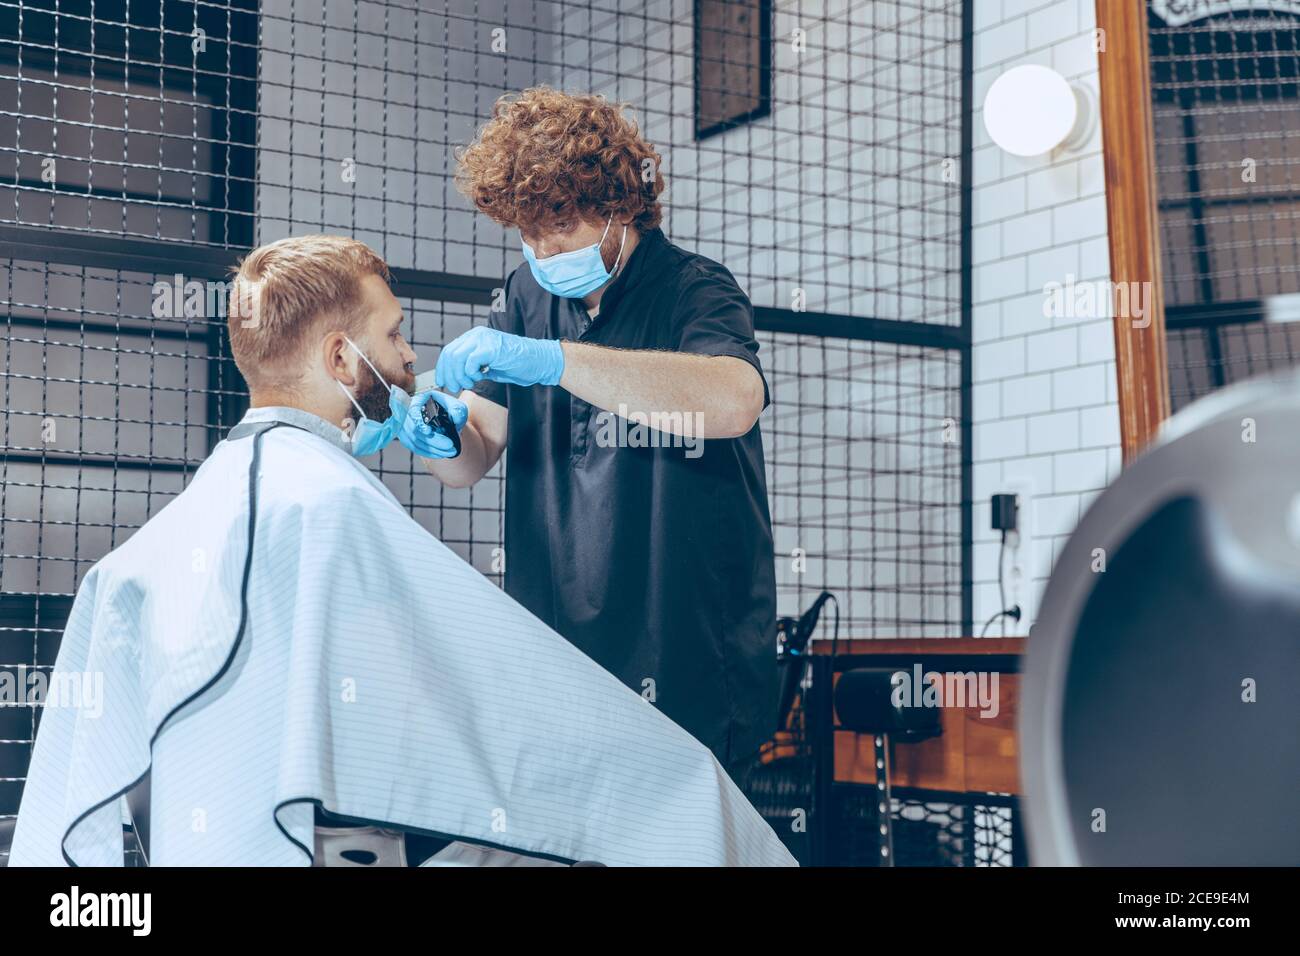 Man getting hair cut at the barbershop wearing mask during coronavirus pandemic. Professional barber wearing gloves. Covid-19, beauty, selfcare, style, healthcare and medicine concept. Stock Photo